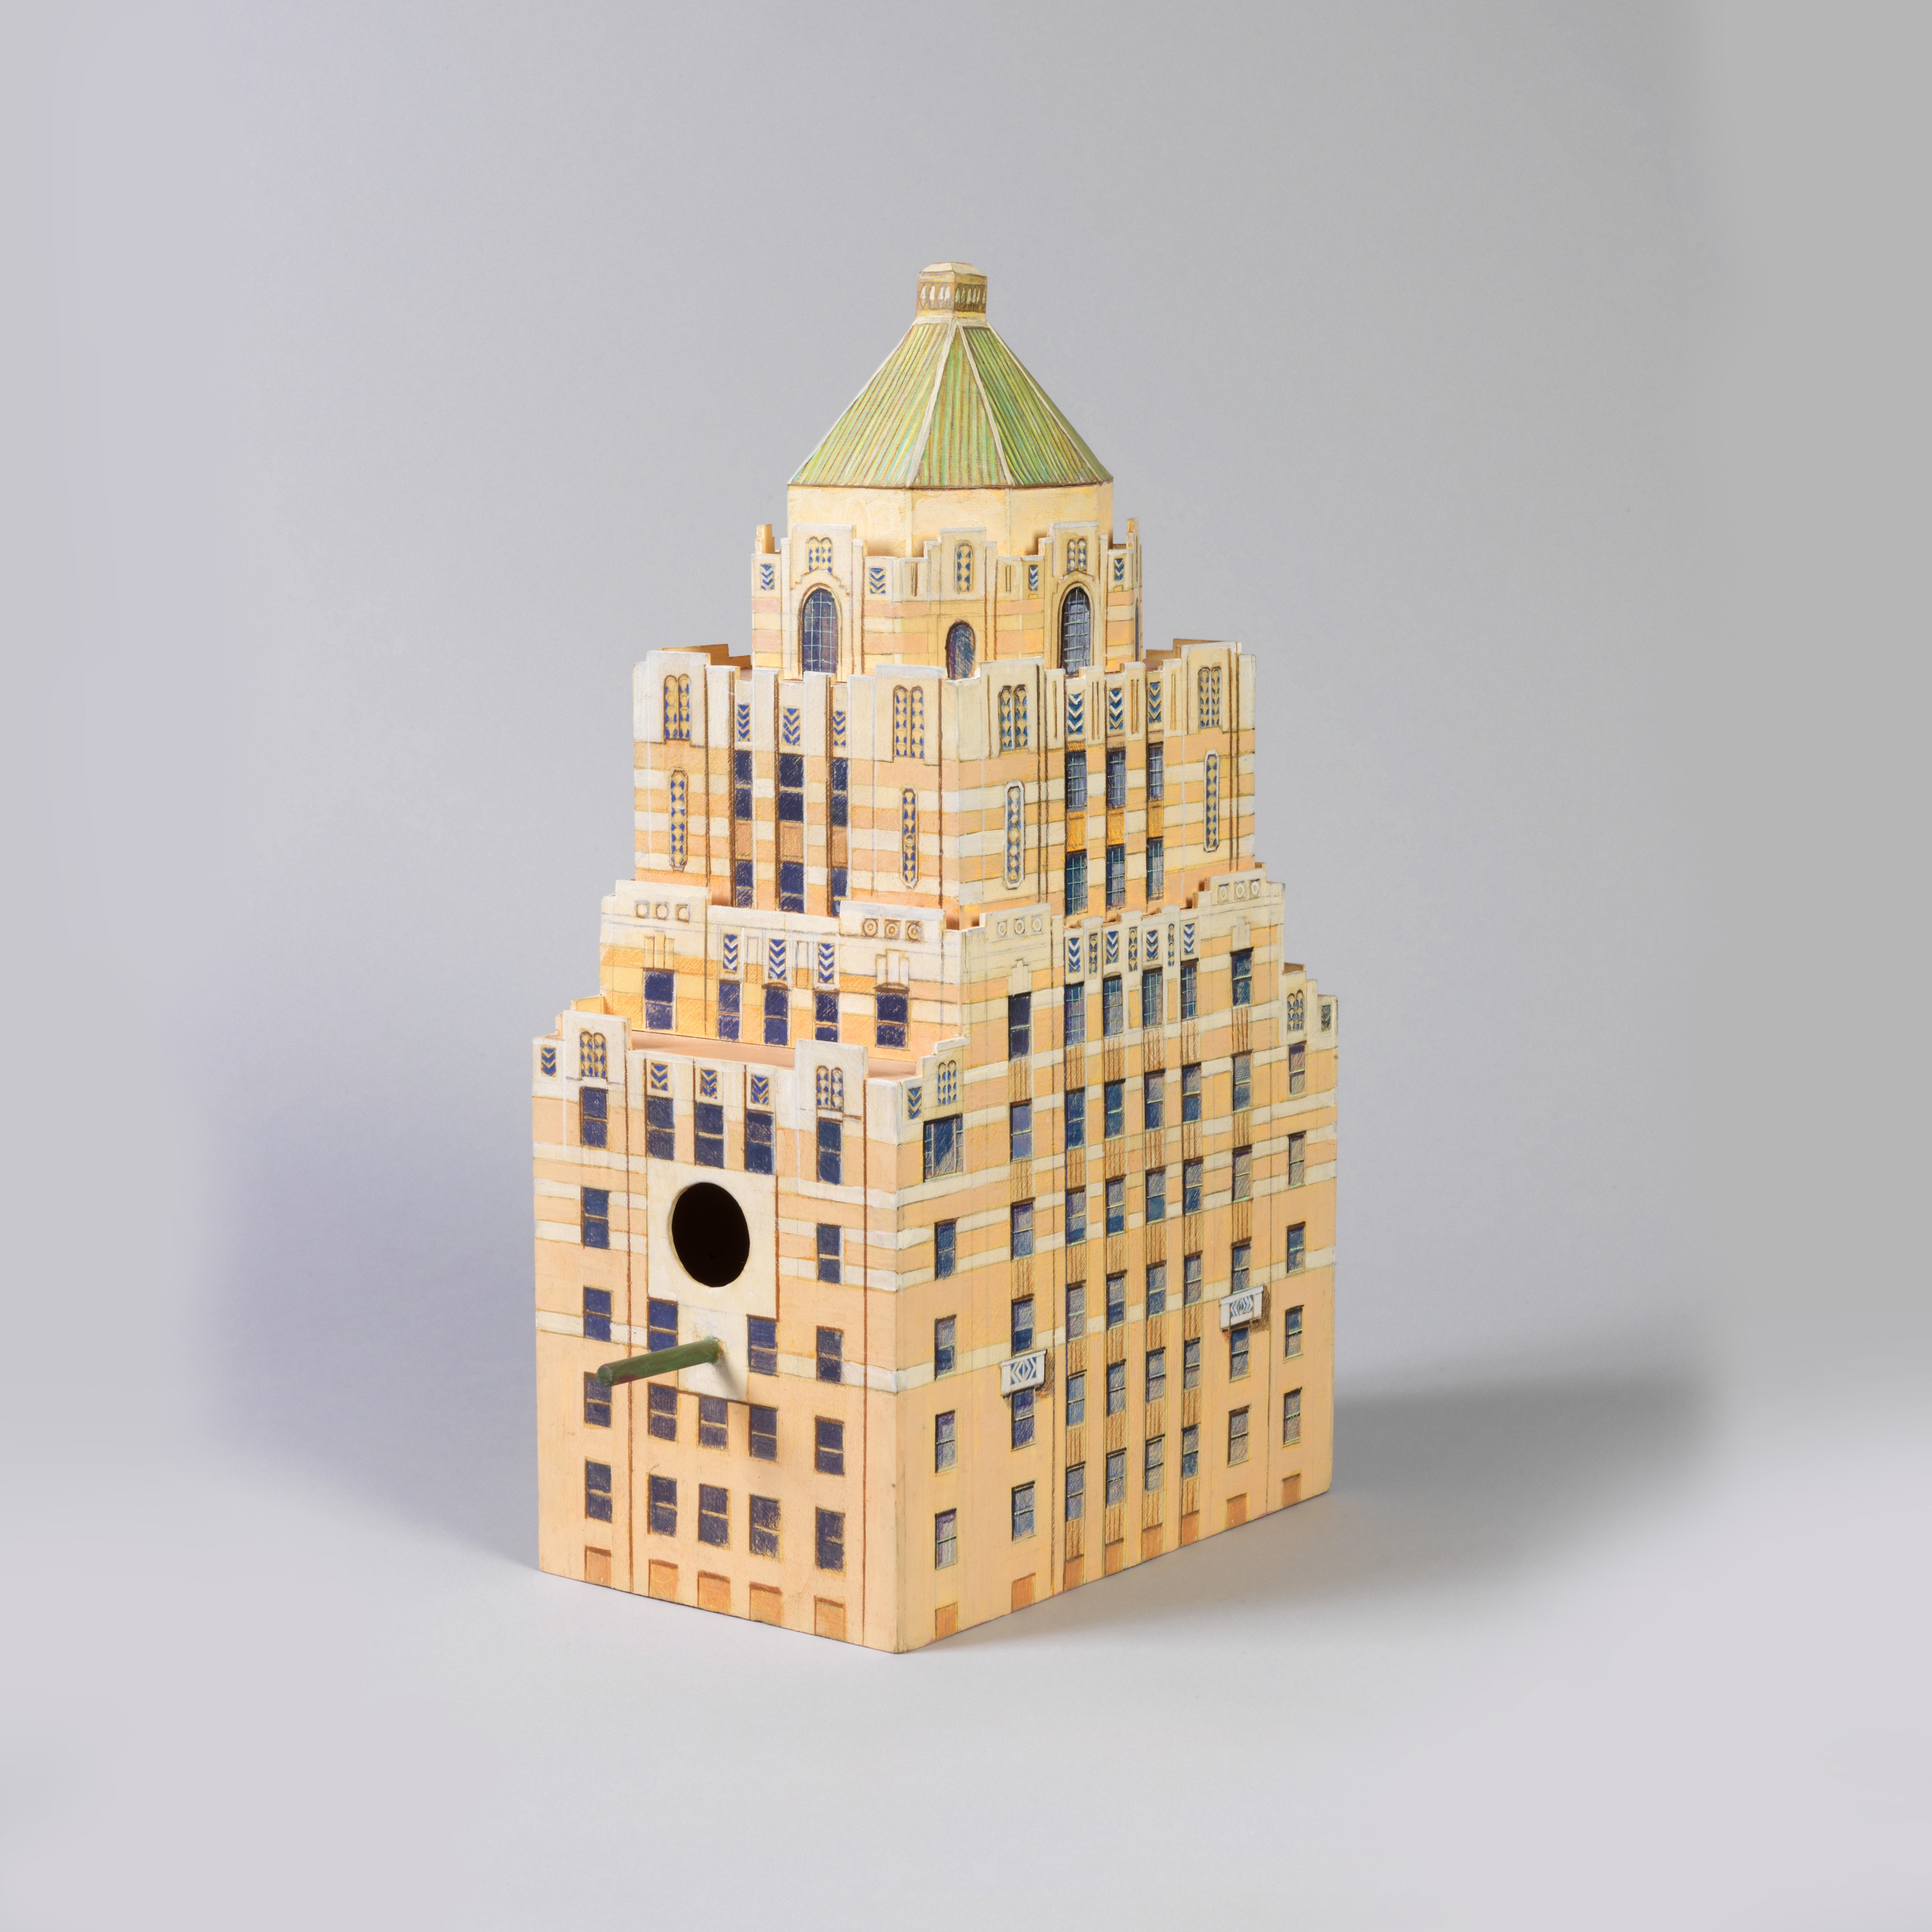 Birdhouse Model of the Carlyle Hotel